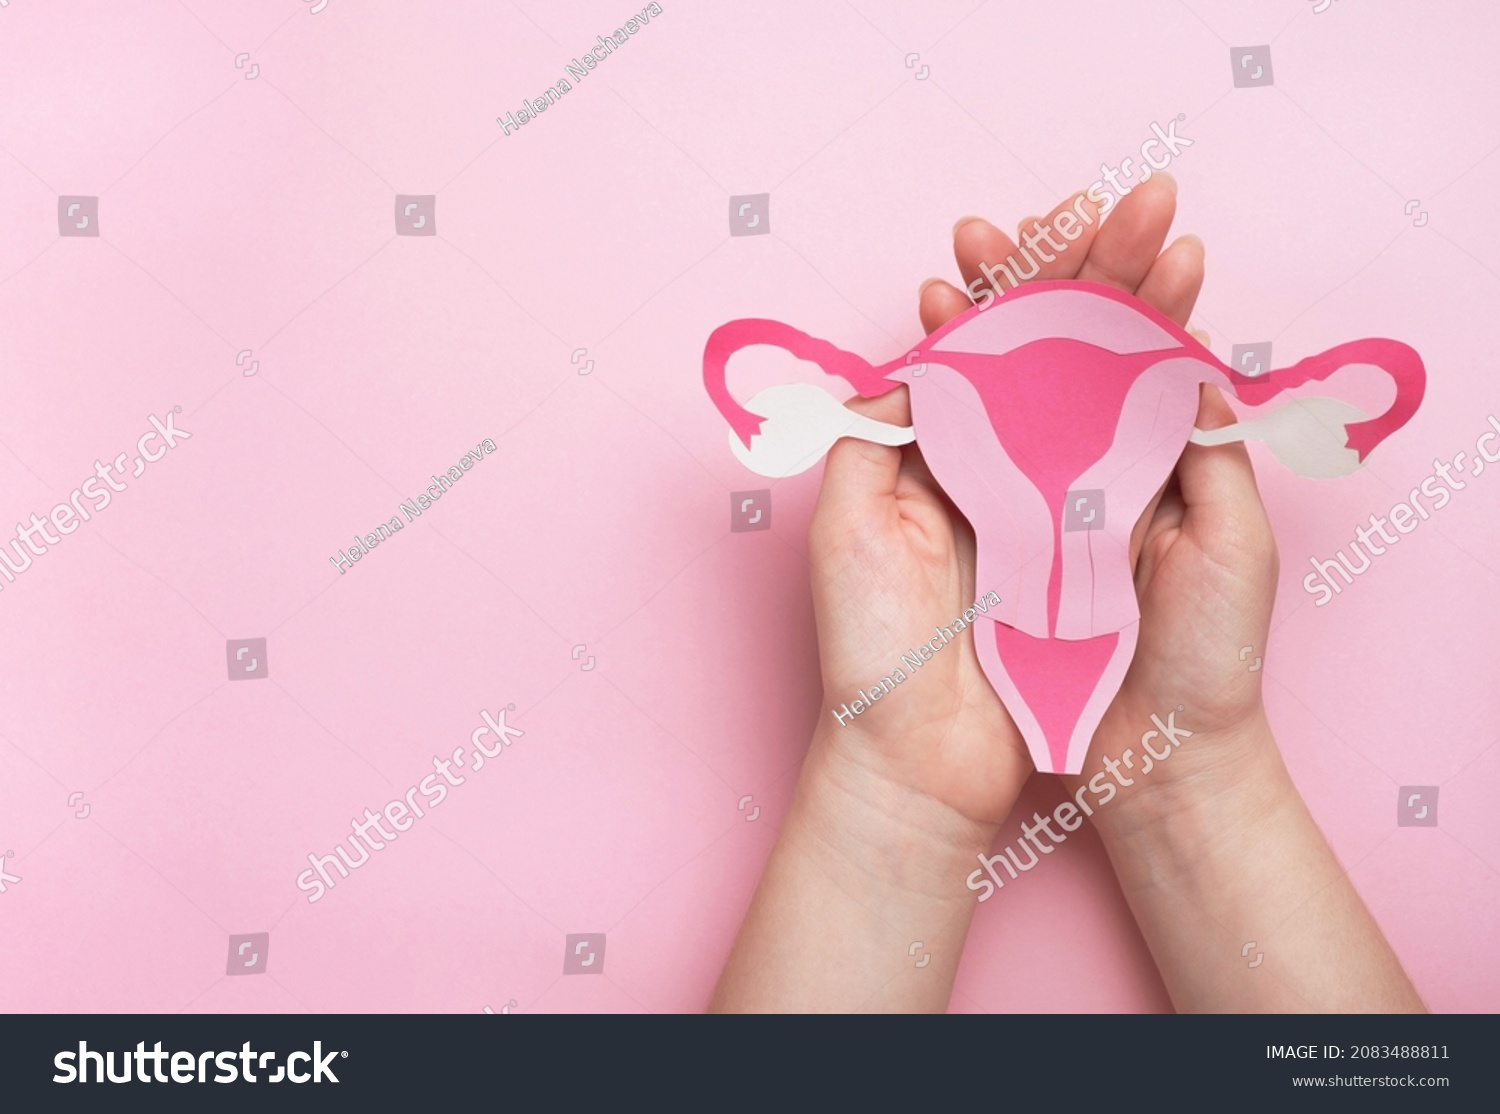 Women's health, gynecology and reproductive system concept. Woman hands holding decorative model uterus on pink background. Top view, copy space #2083488811